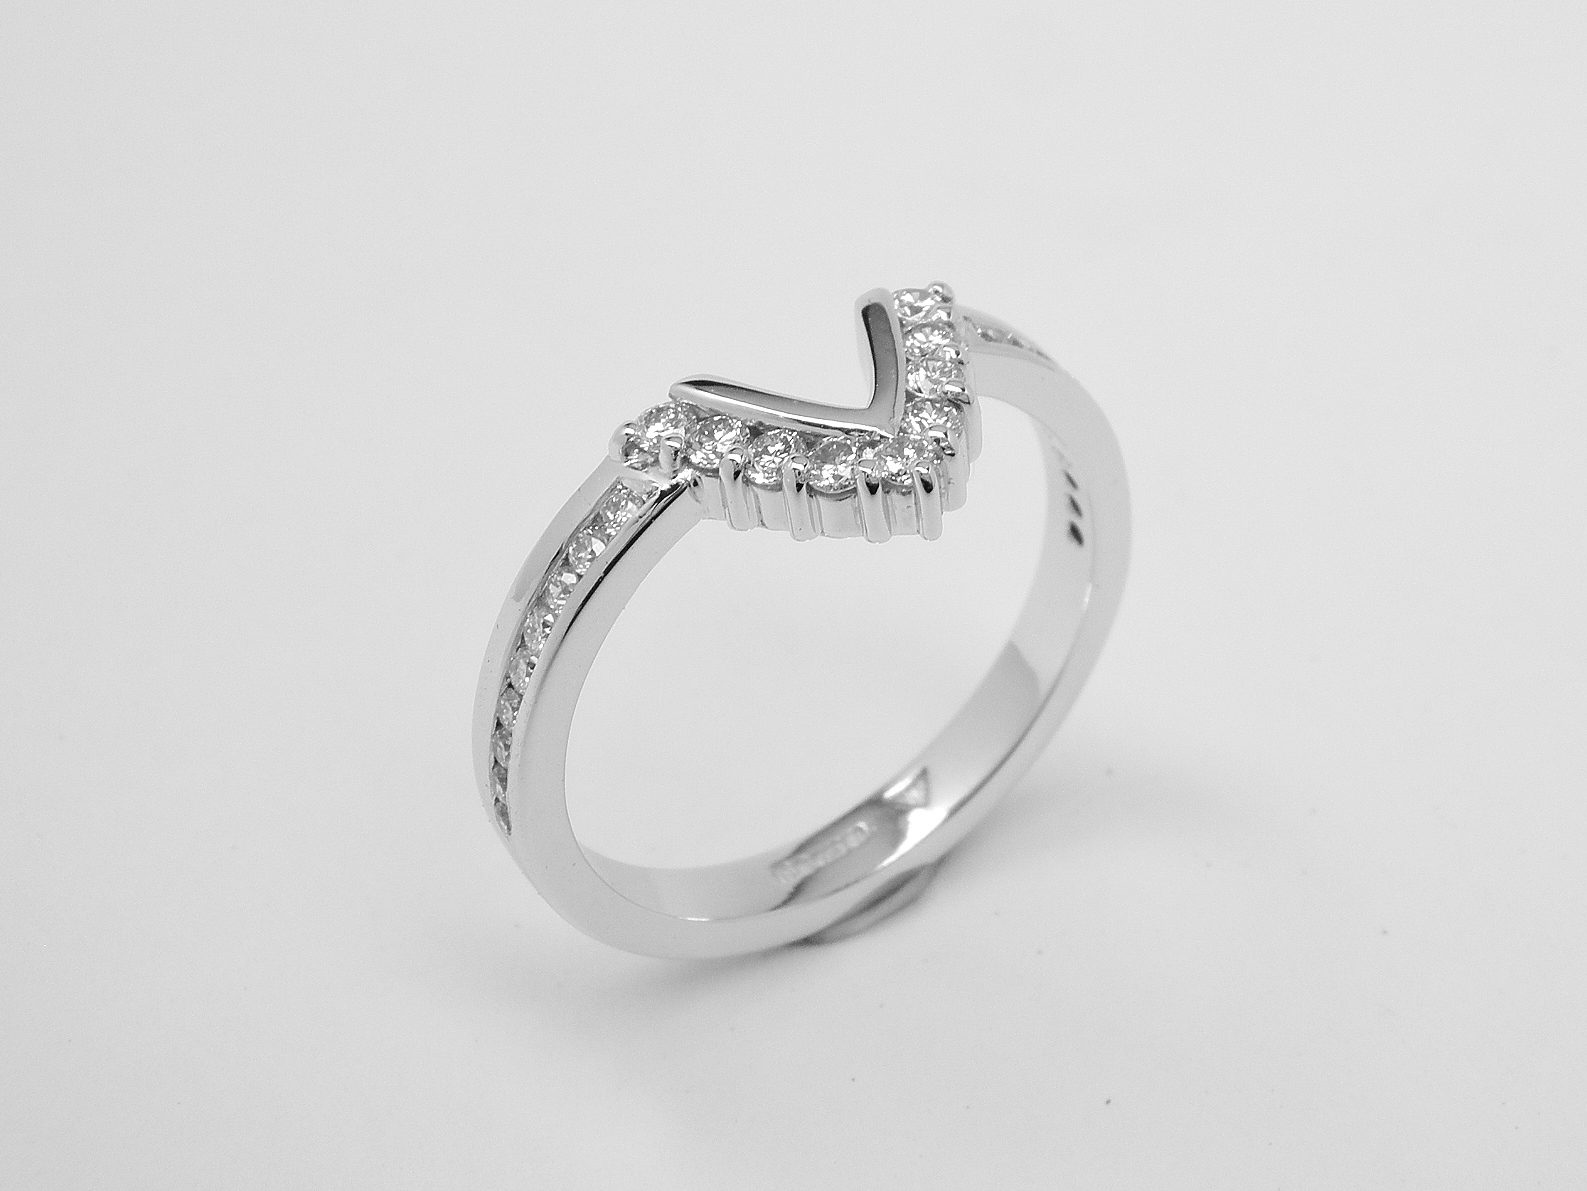 9 stone round brilliant cut diamond part channel set platinum wedding - eternity ring with channel set diamond shoulders shaped to fit around marquise diamond ring.